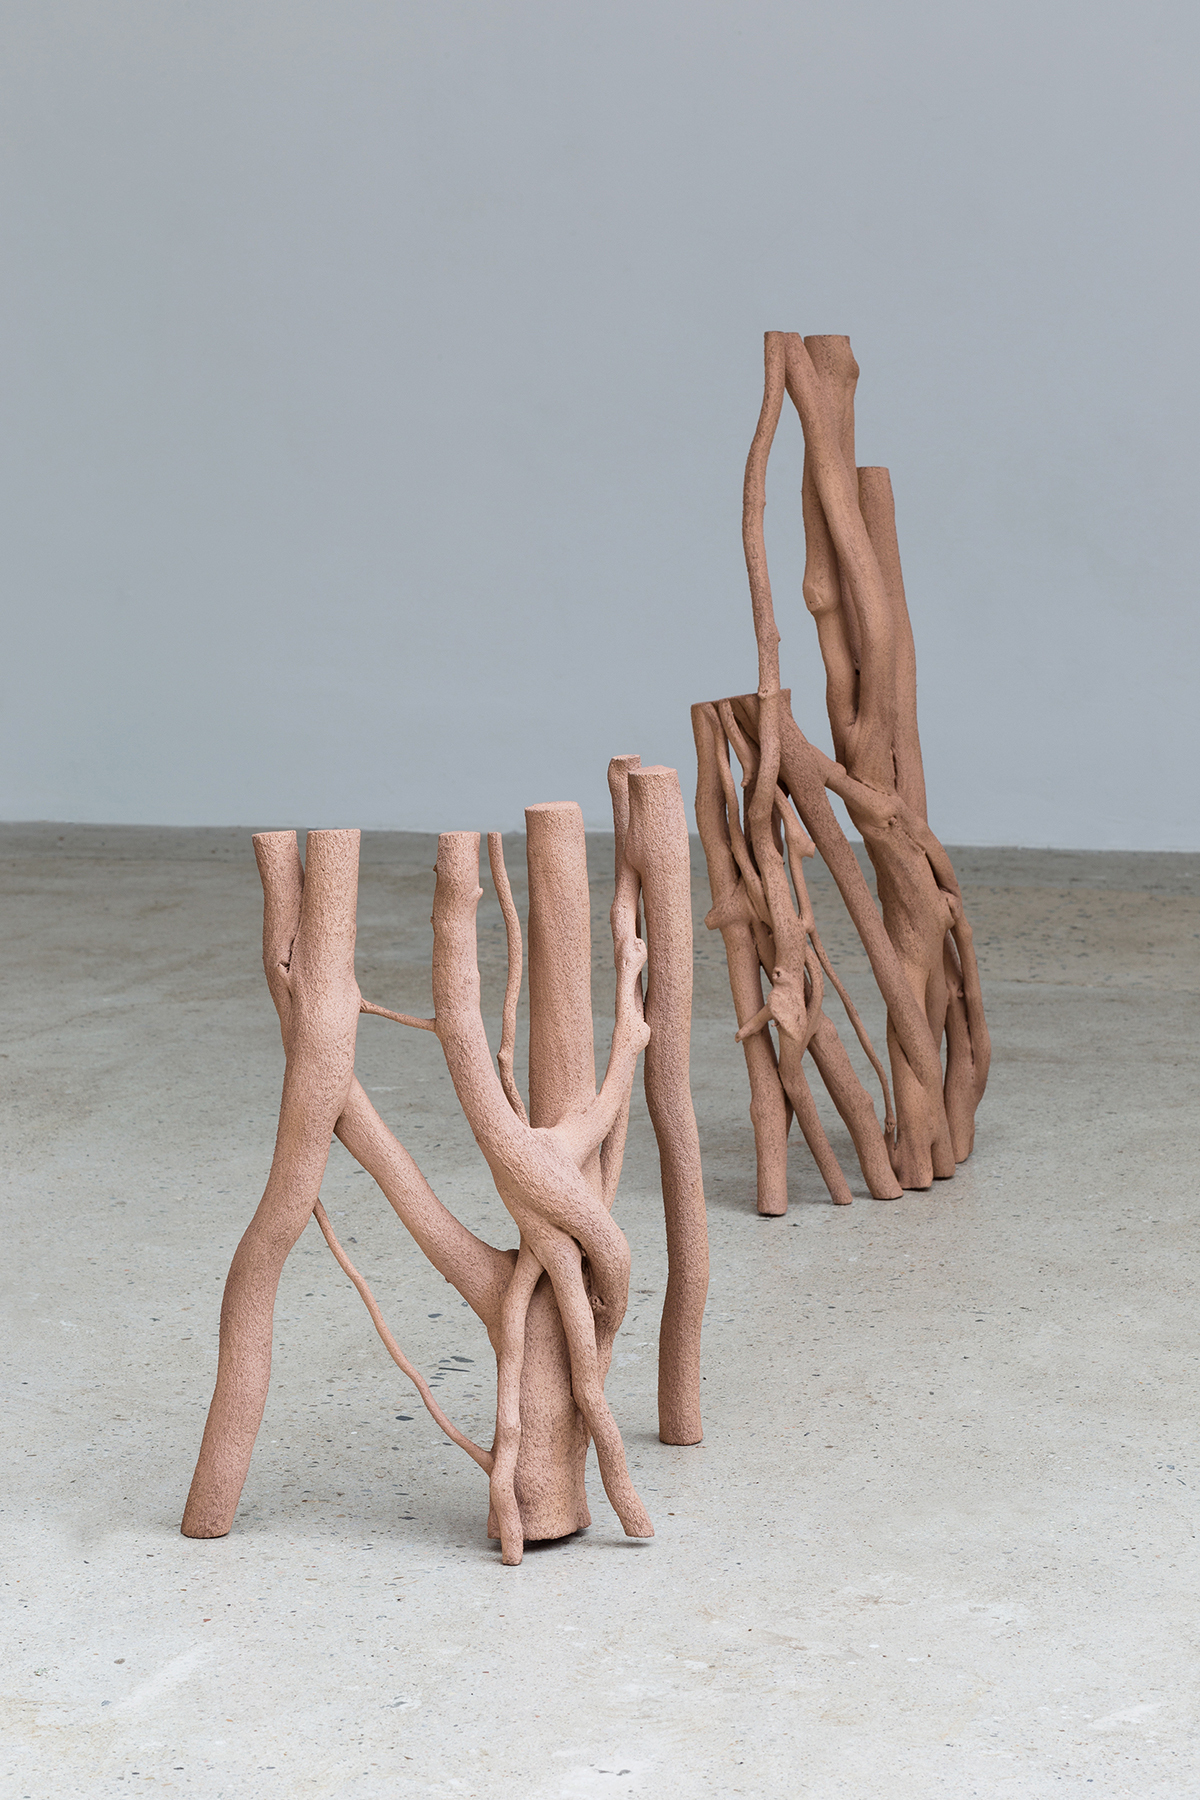 Binary Relation & Vains of Linear Dependence, 2020 wood, bronze 36 x 40 x 18 cm and 160 x 45 cm